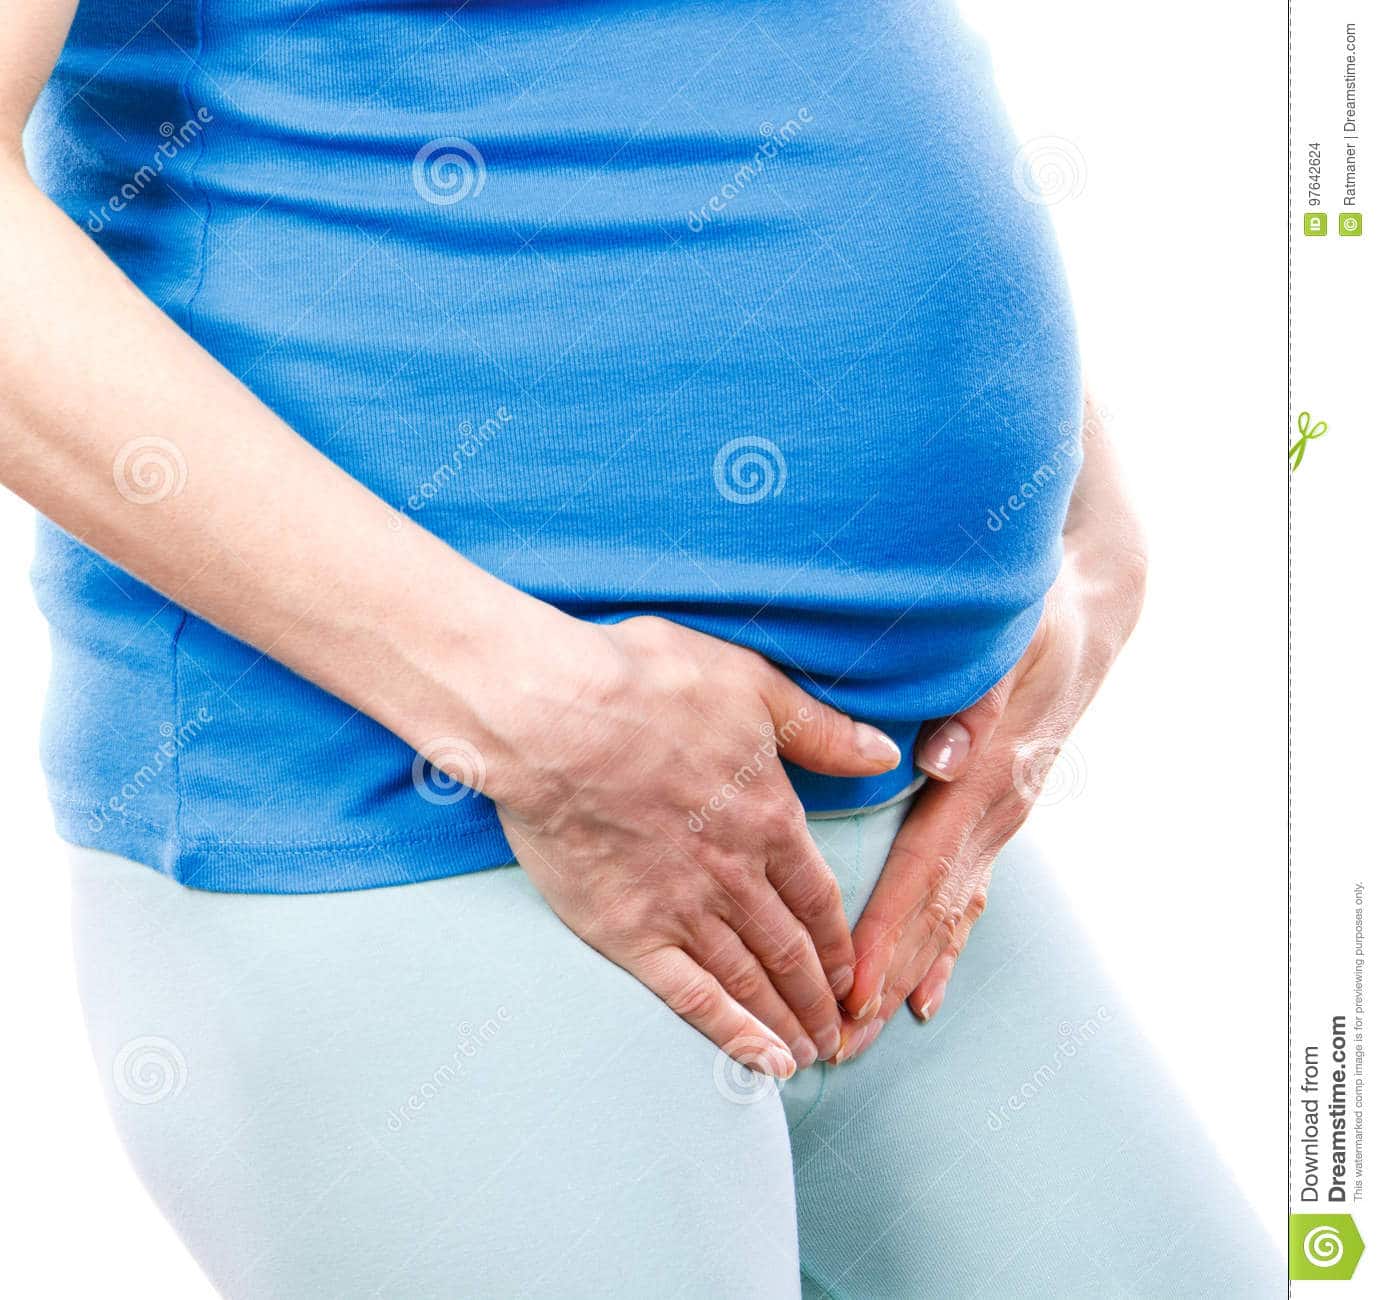 Pregnant Woman With Hands On Her Stomach, Pregnancy Health Care And ...